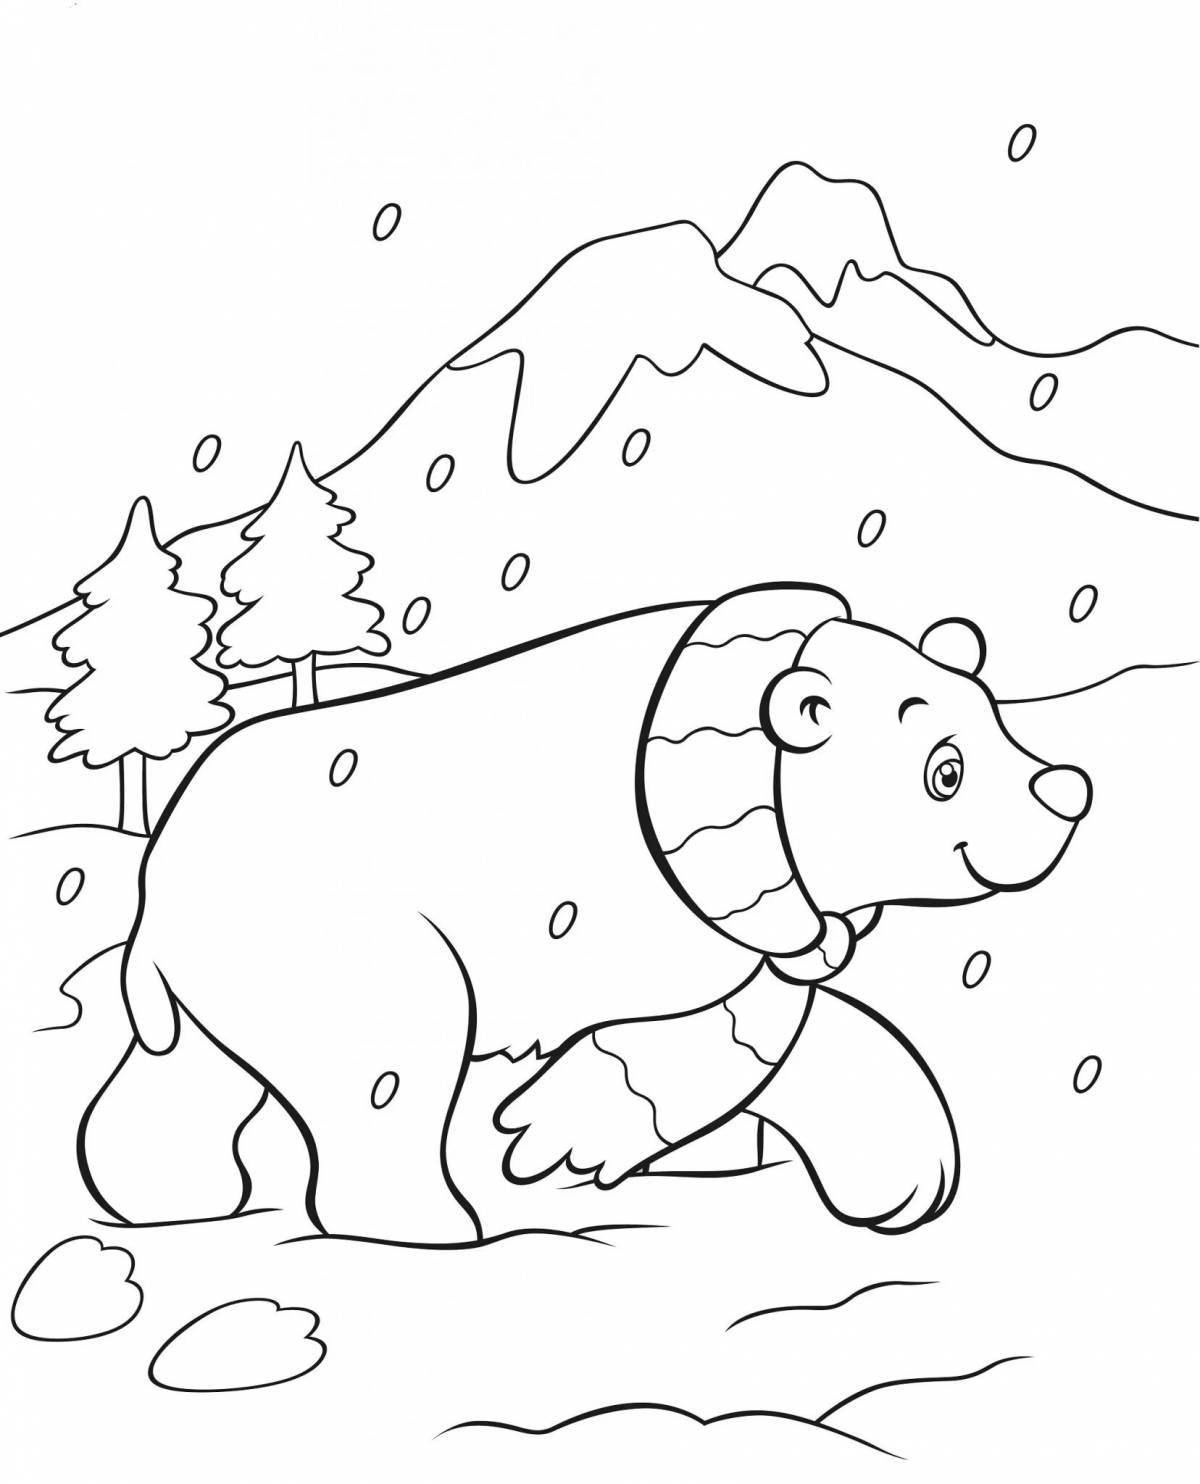 Coloring book shining bear in the north